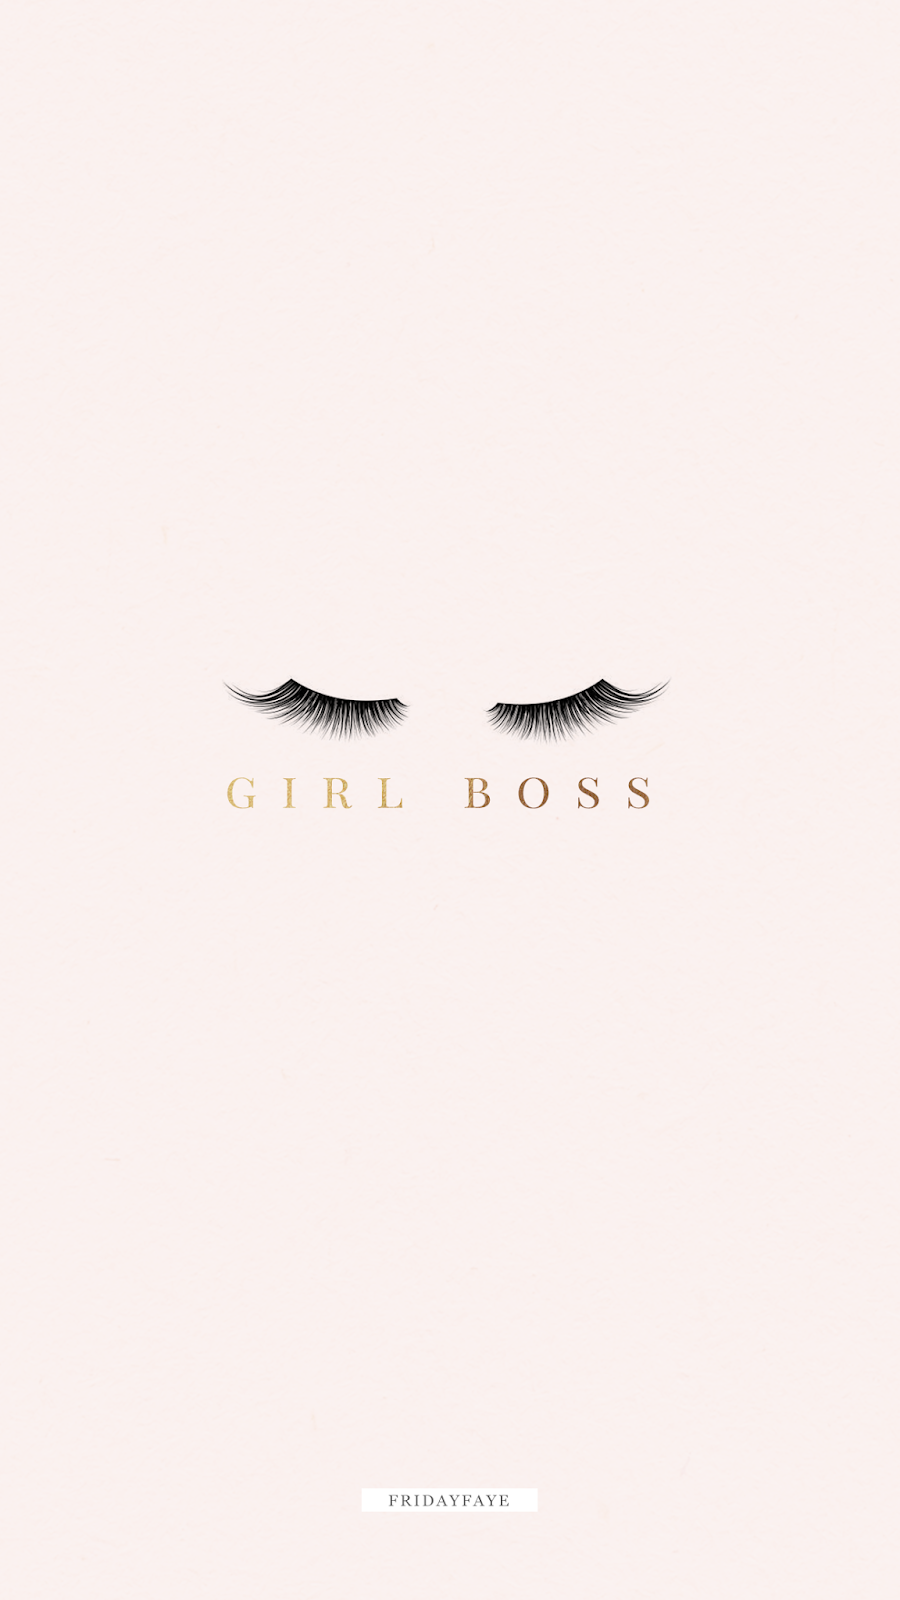 Girl Boss. Girl boss wallpaper, Boss wallpaper, Girl boss quotes